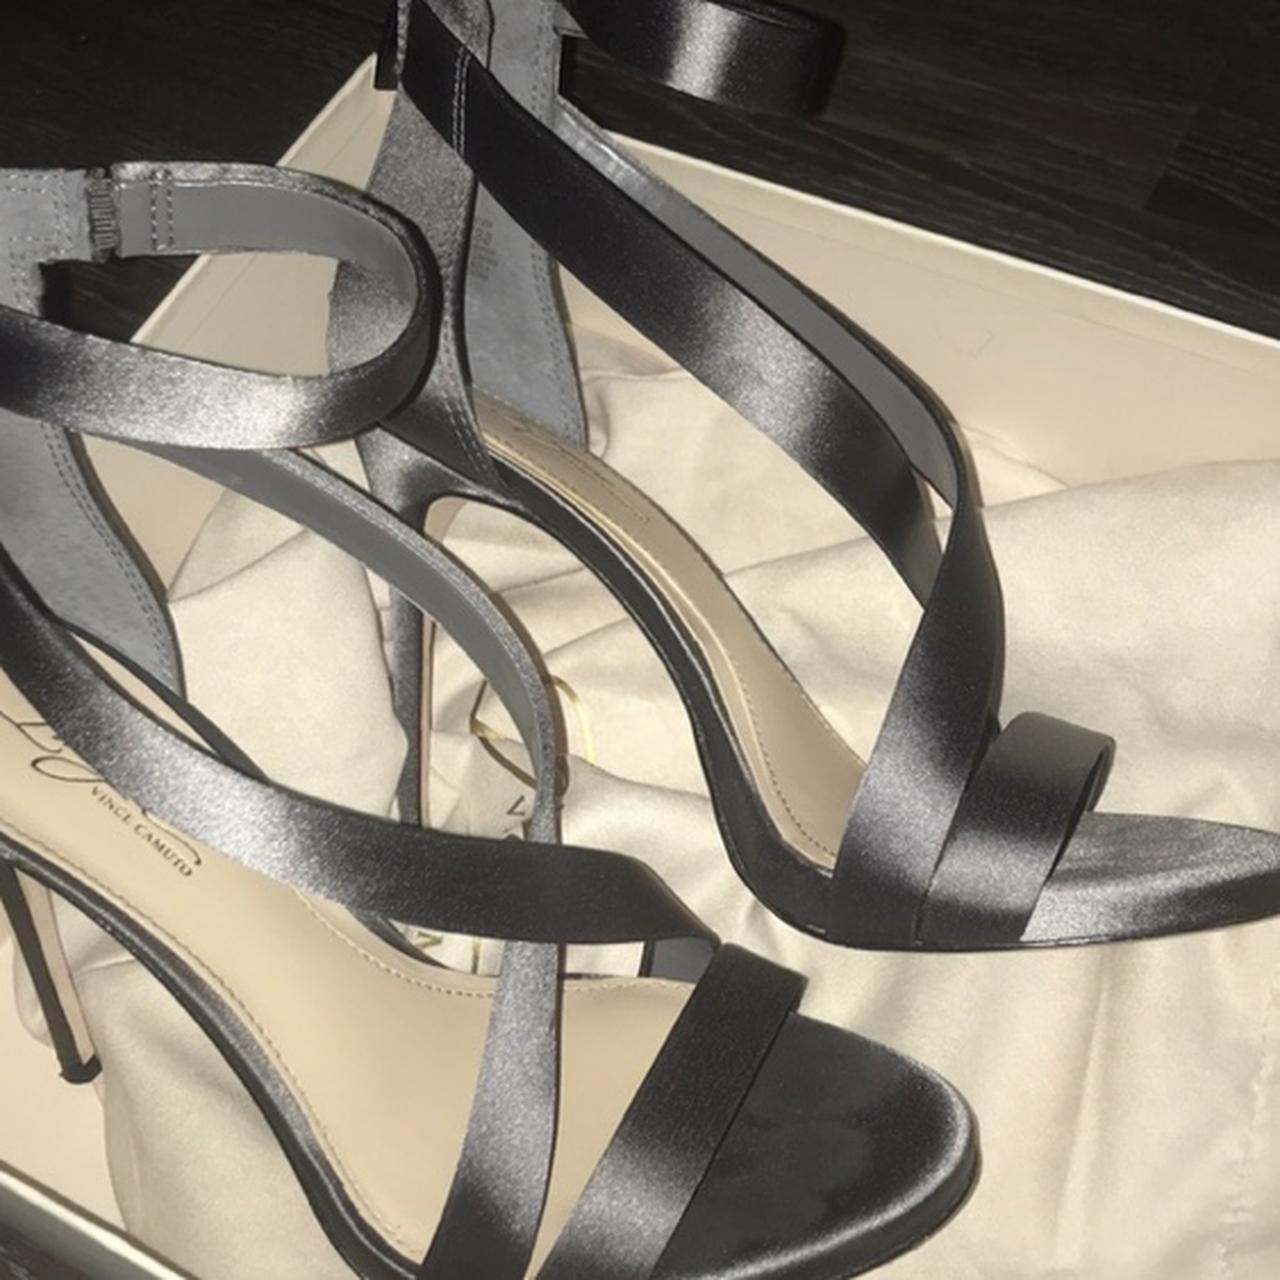 Vince Camuto Women's Grey and Silver Courts (2)